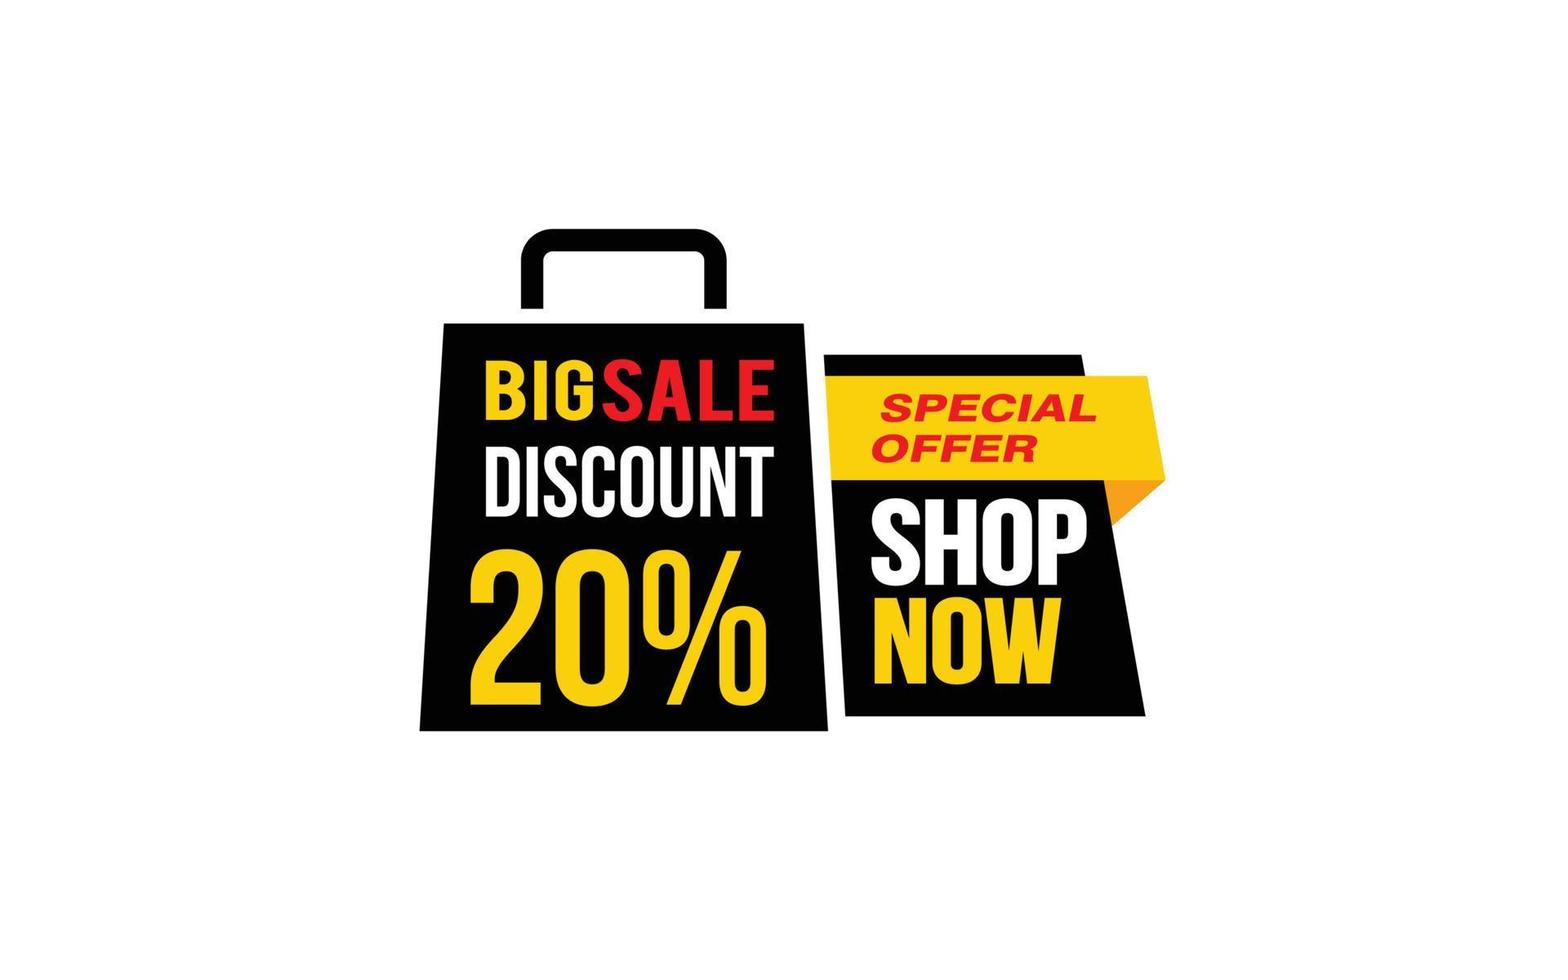 20 Percent SHOP NOW offer, clearance, promotion banner layout with sticker style. vector